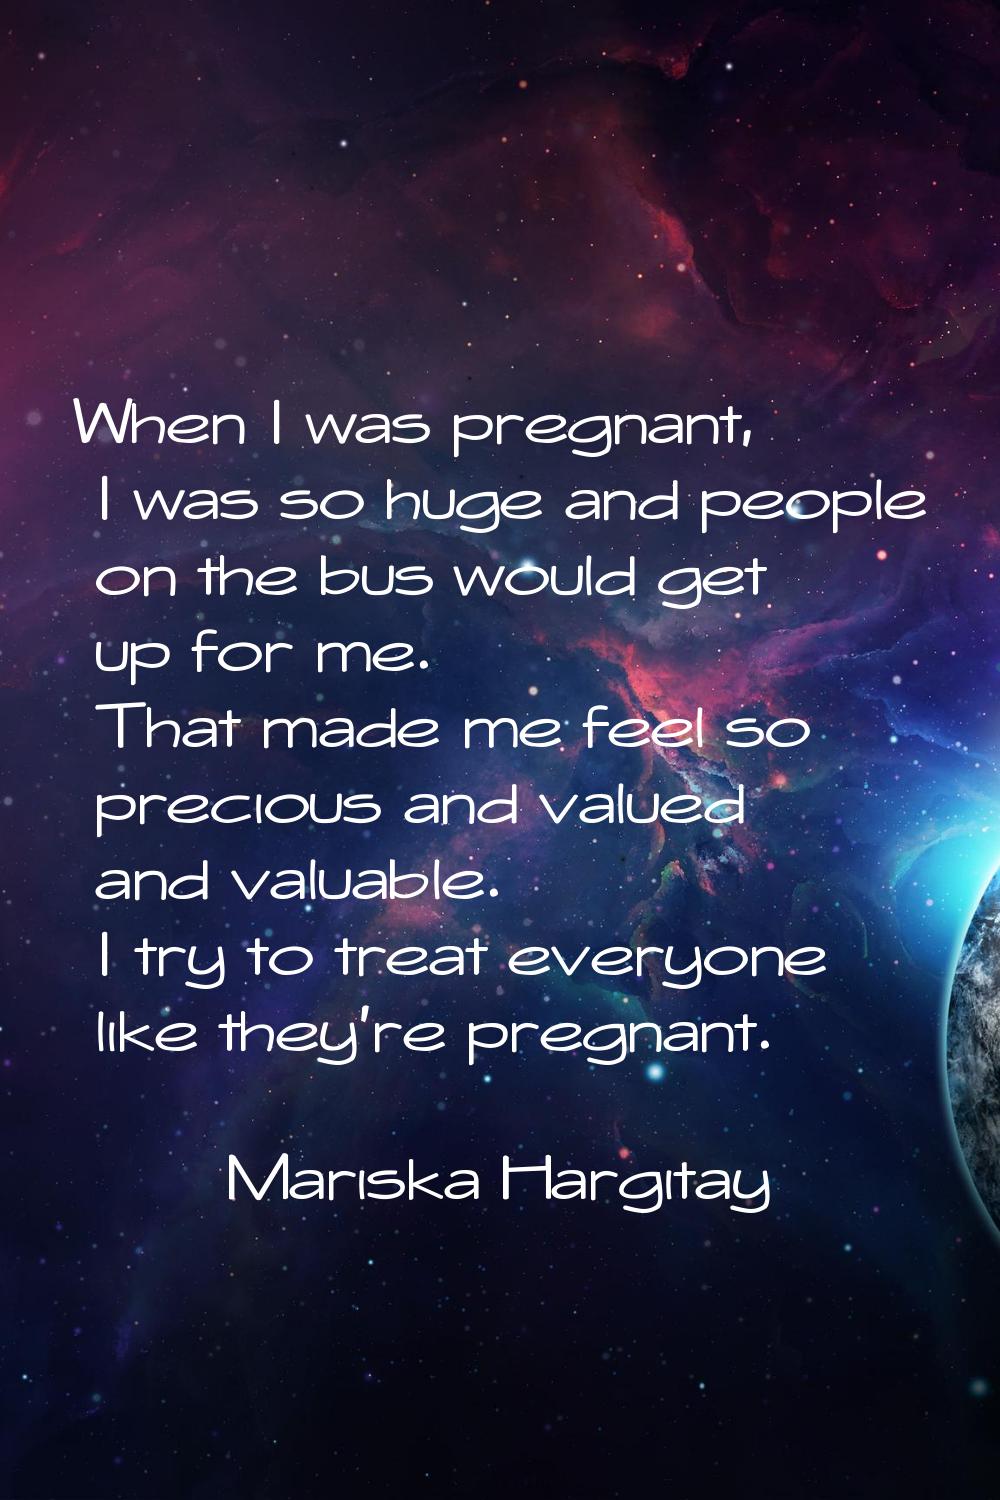 When I was pregnant, I was so huge and people on the bus would get up for me. That made me feel so 